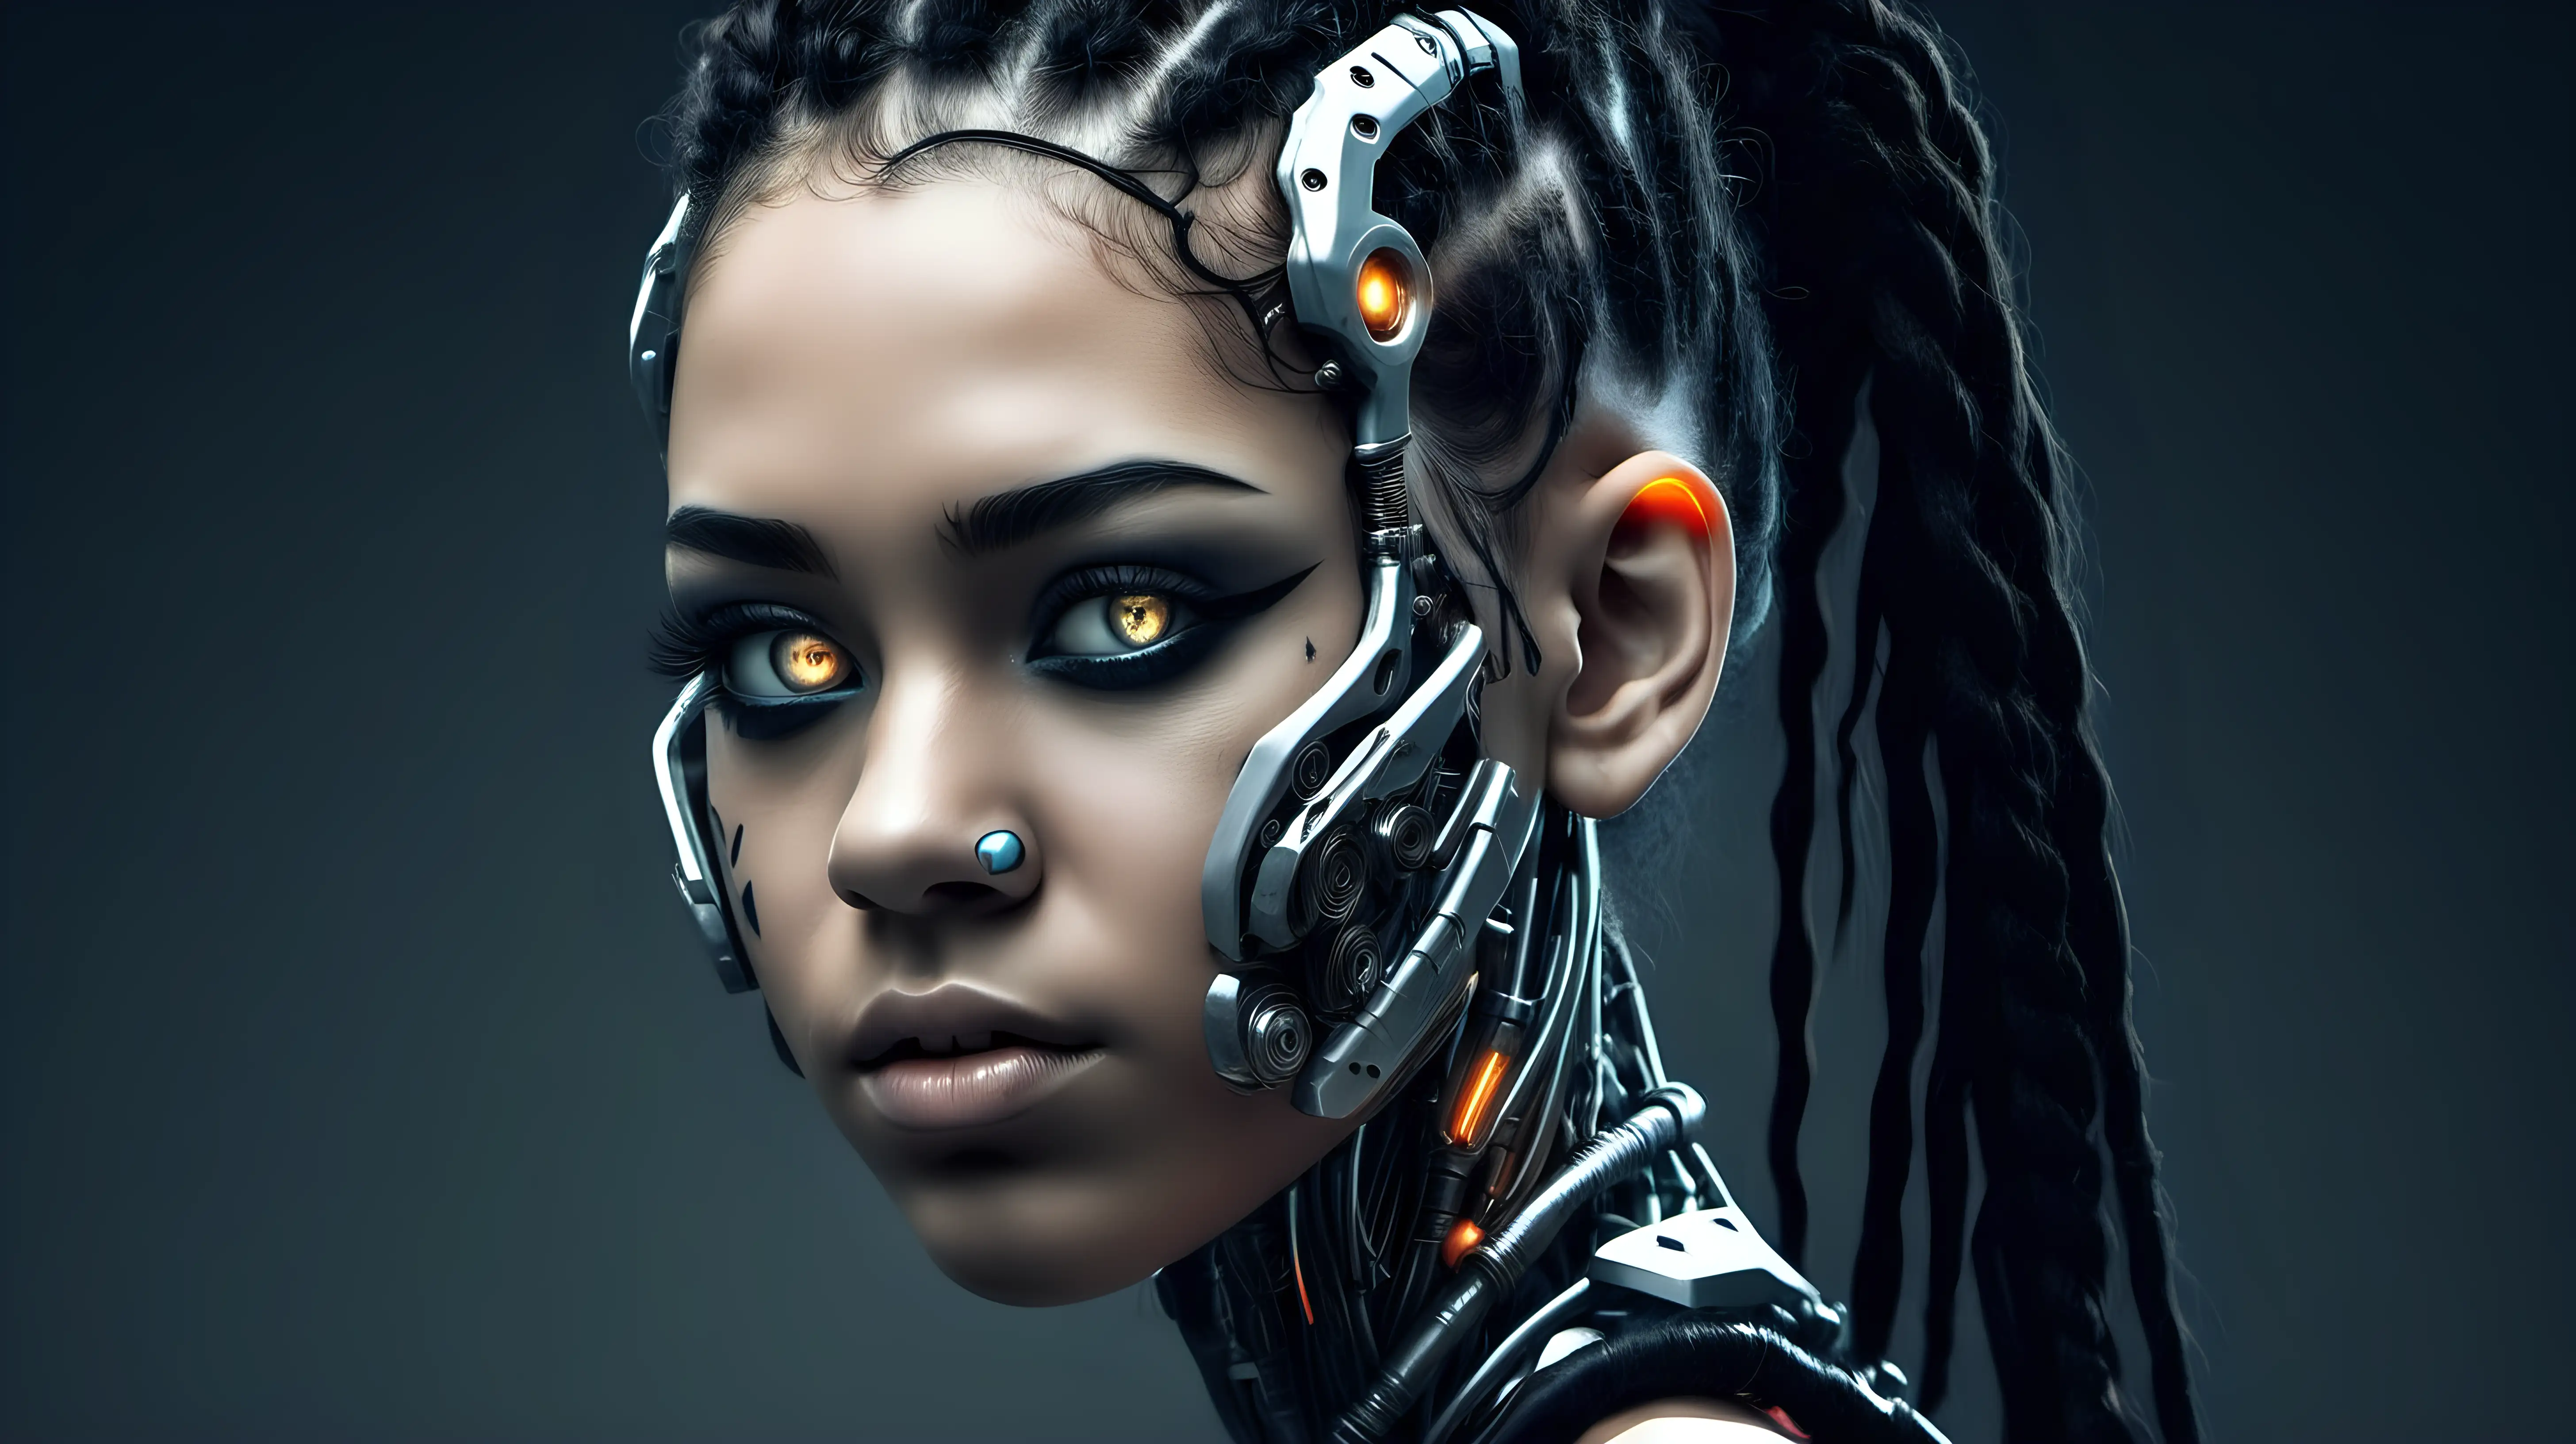 Cyborg woman, 18 years old. She has a cyborg face, but she is extremely beautiful.  Wild hair. Dark braids. Bright under her eyes.